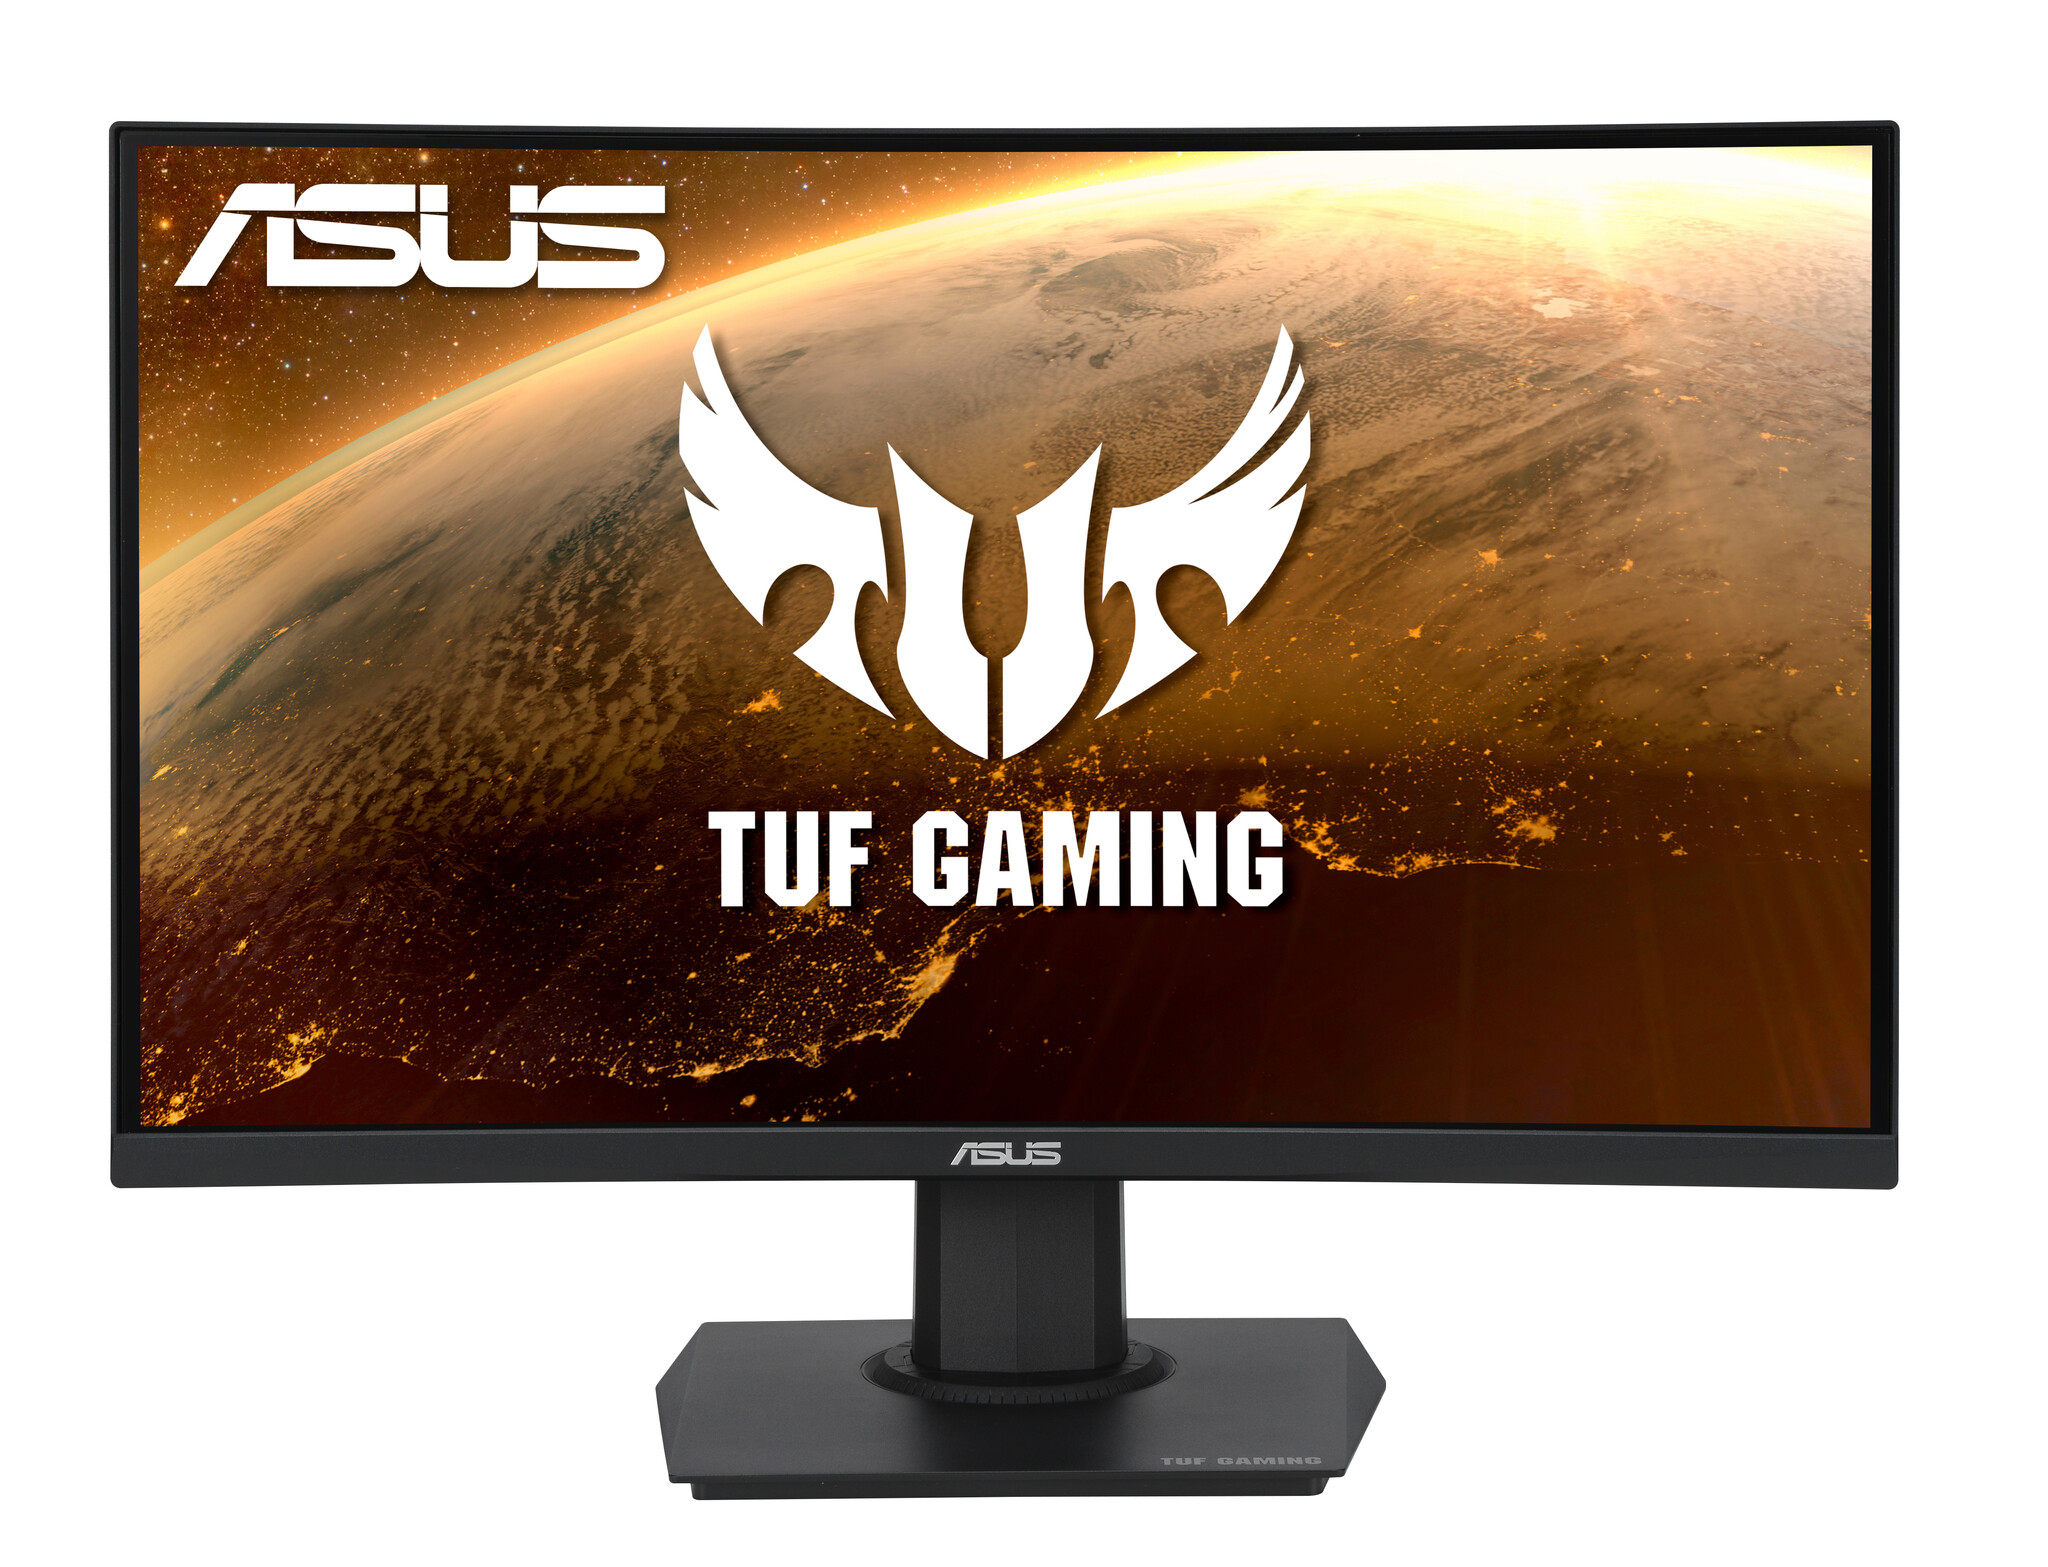 Asus TUF Gaming 23.6″ Full HD 165Hz Curved Gaming Monitor with AMD FreeSync – Black (VG24VQE) #366819